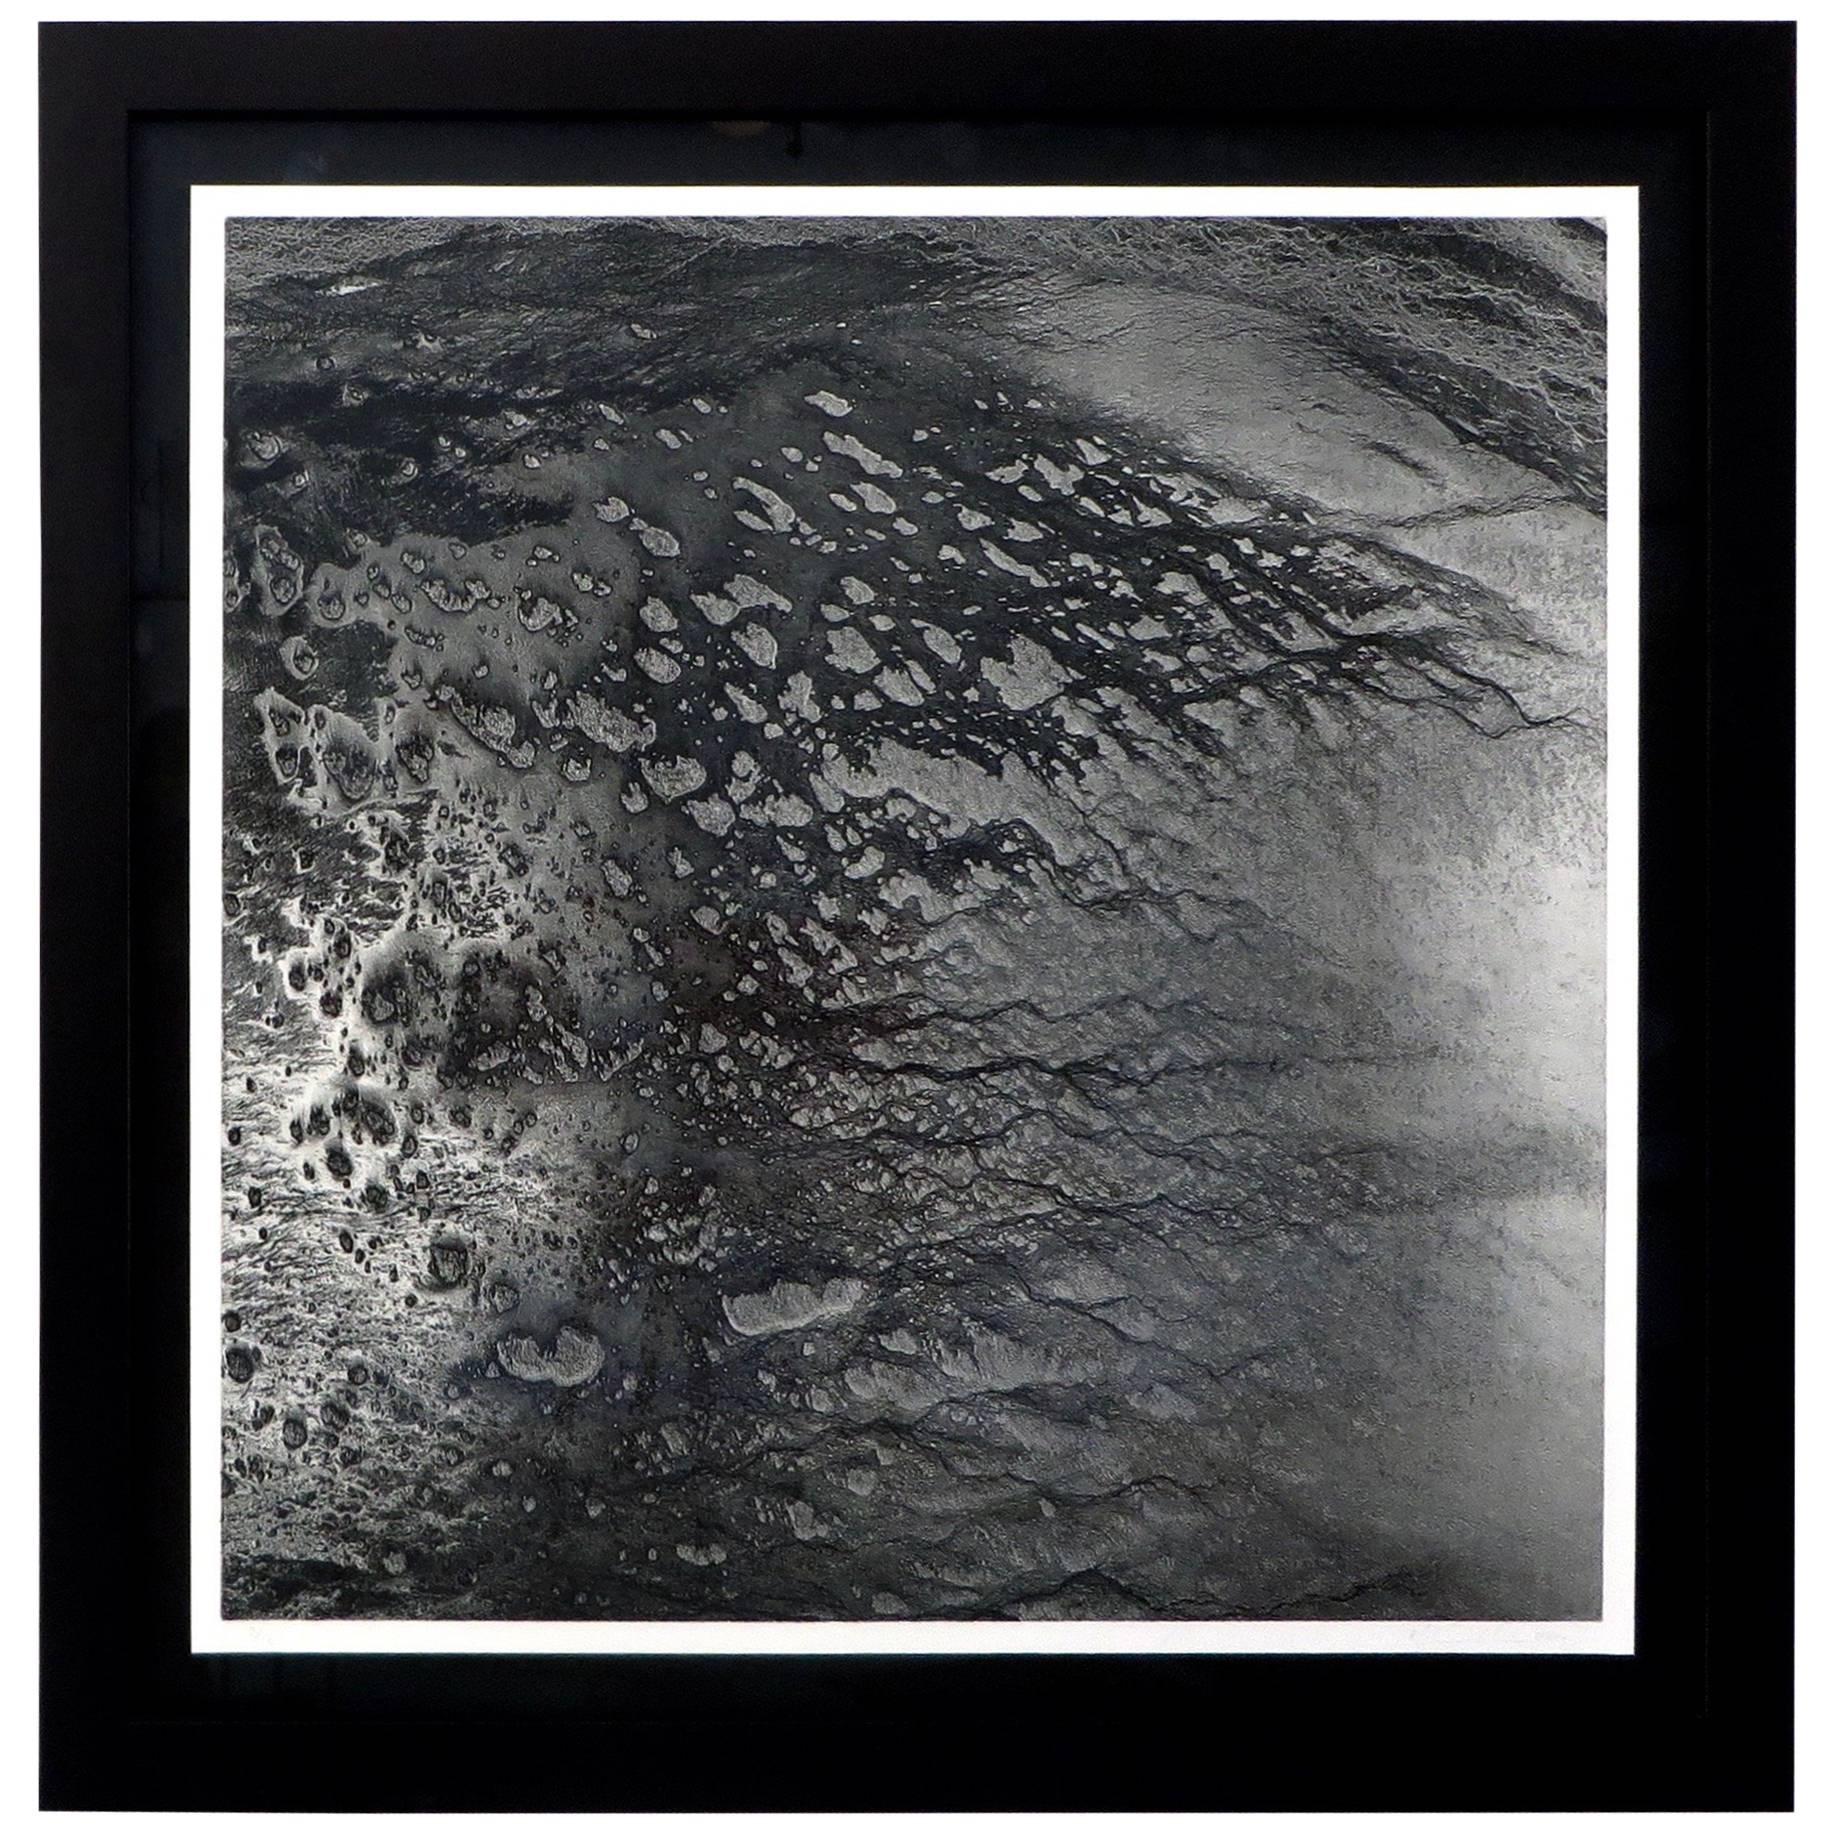 Black-and-White Photogravure "Yet Untitled" by Artist Olafur Eliasson